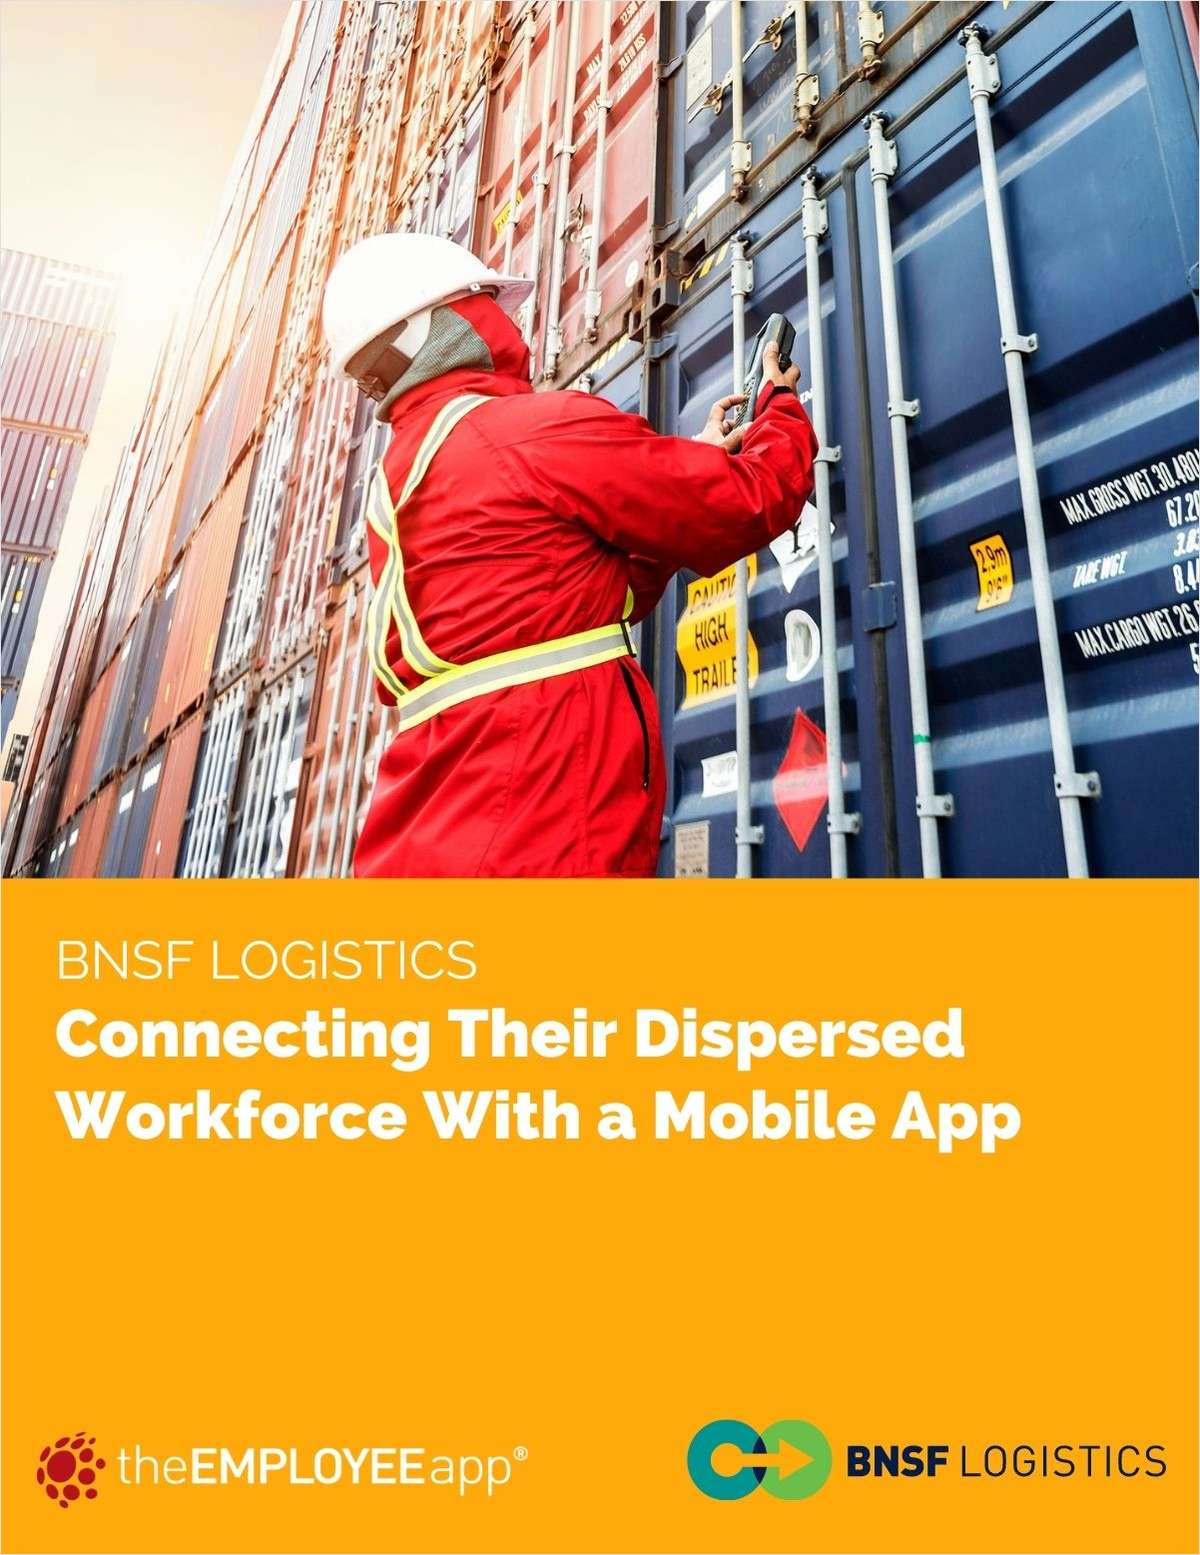 How BNSF Logistics Connects Their Dispersed Workforce